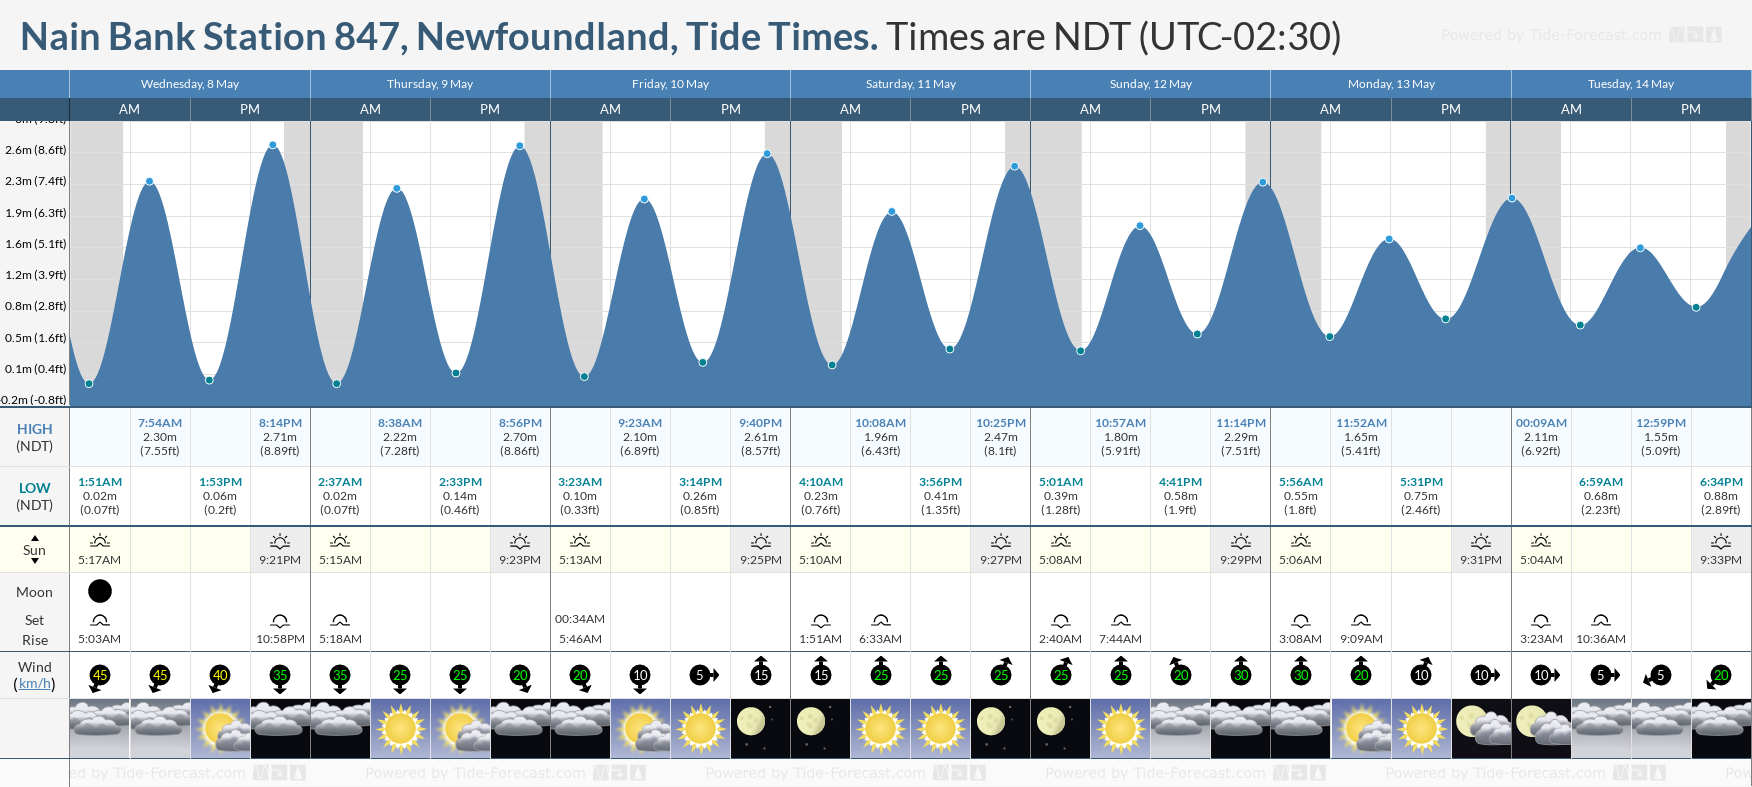 Nain Bank Station 847, Newfoundland Tide Chart including high and low tide tide times for the next 7 days